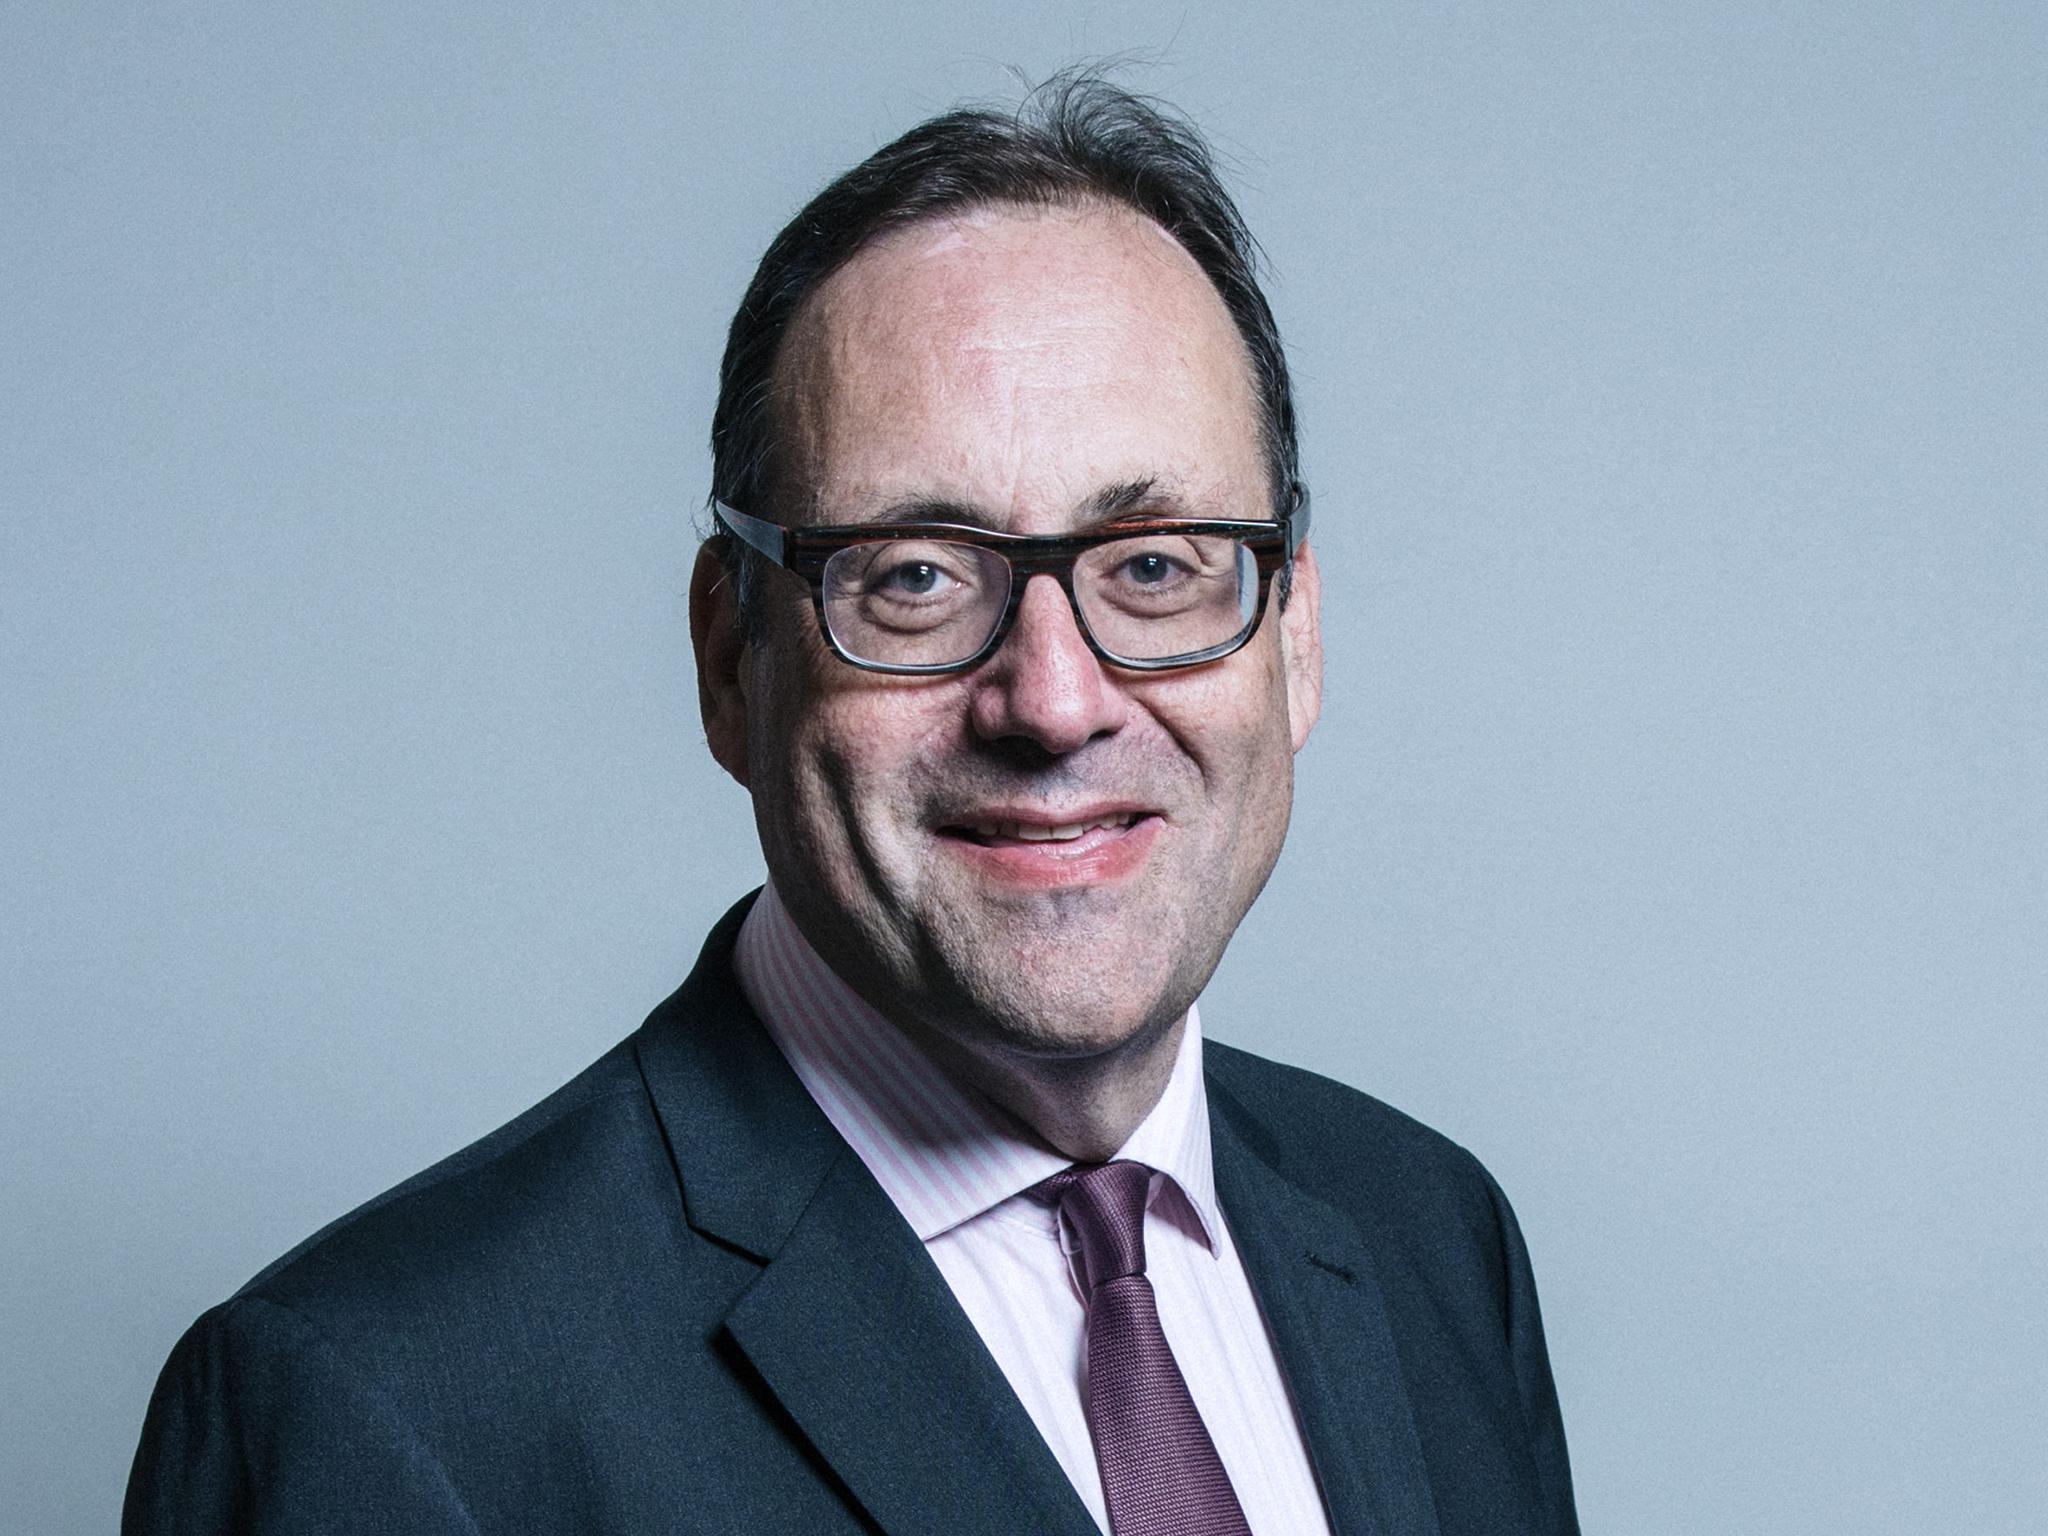 Richard Harrington resigned as a Conservative MP in 2019 over the government's Brexit policy